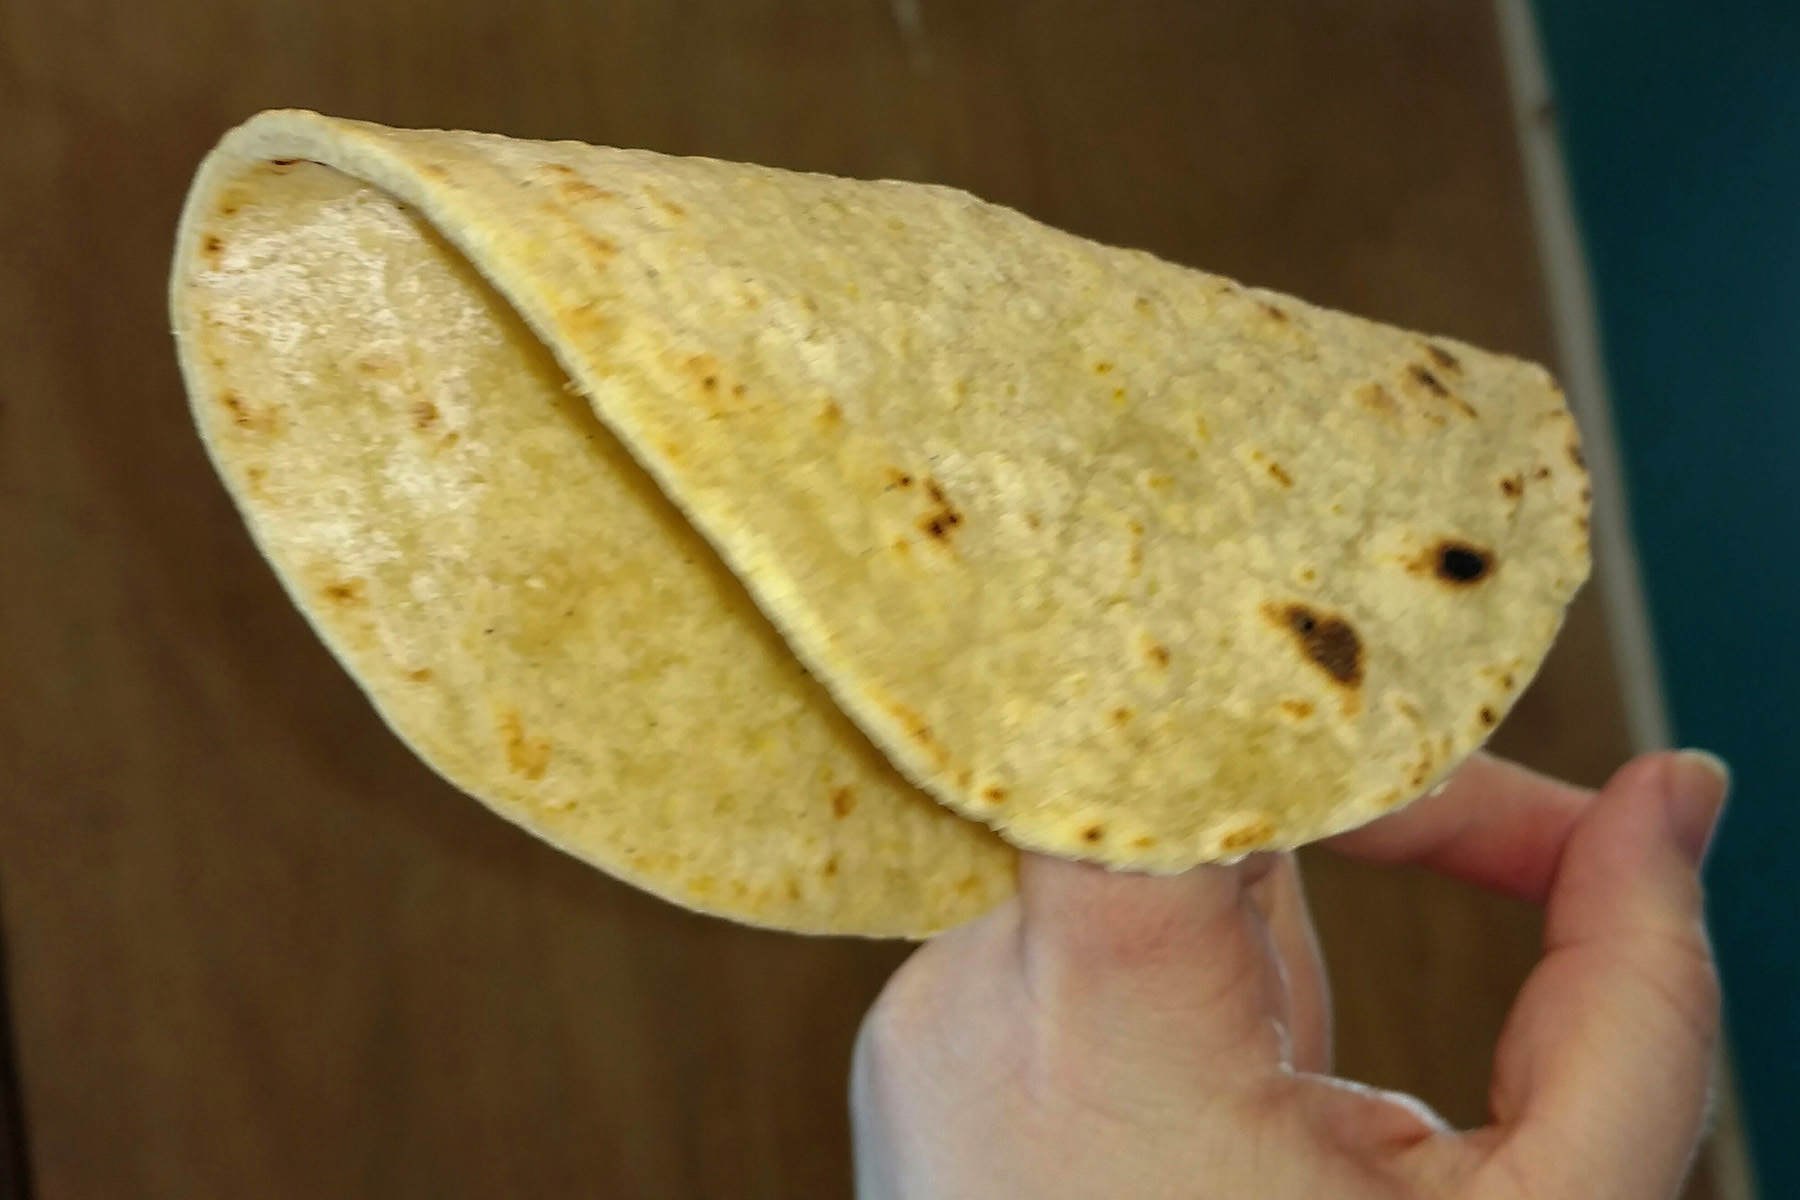 a yellow tortilla is folded over a pointed finger. It is visibly soft.